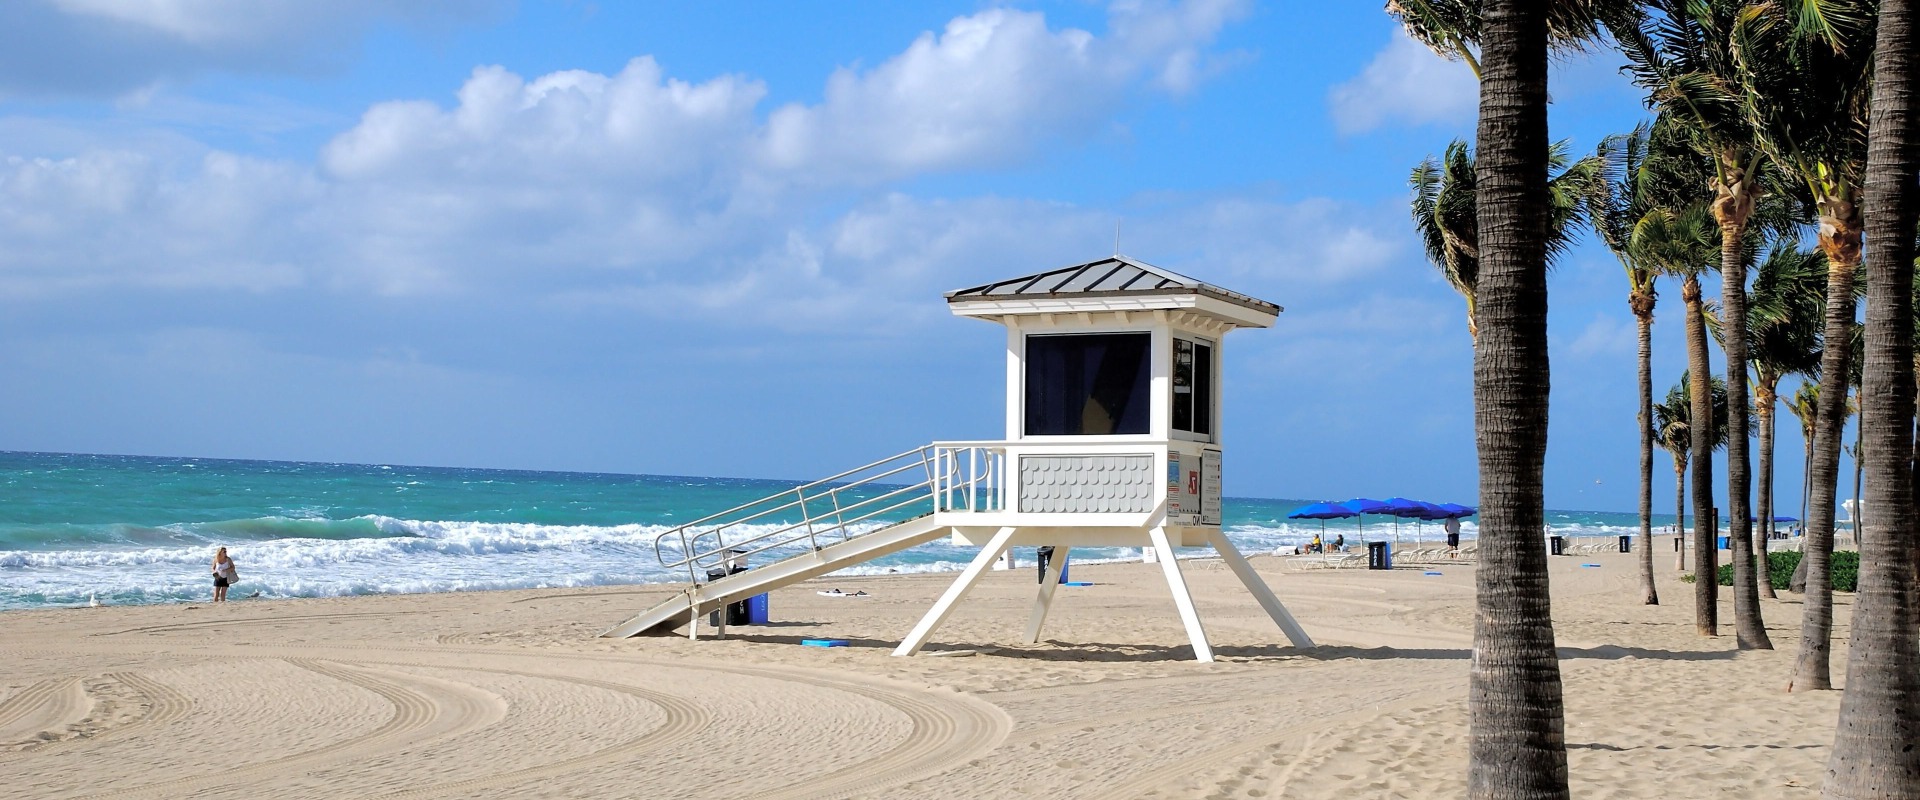 Exploring Budget-Friendly Accommodations in Fort Lauderdale, FL